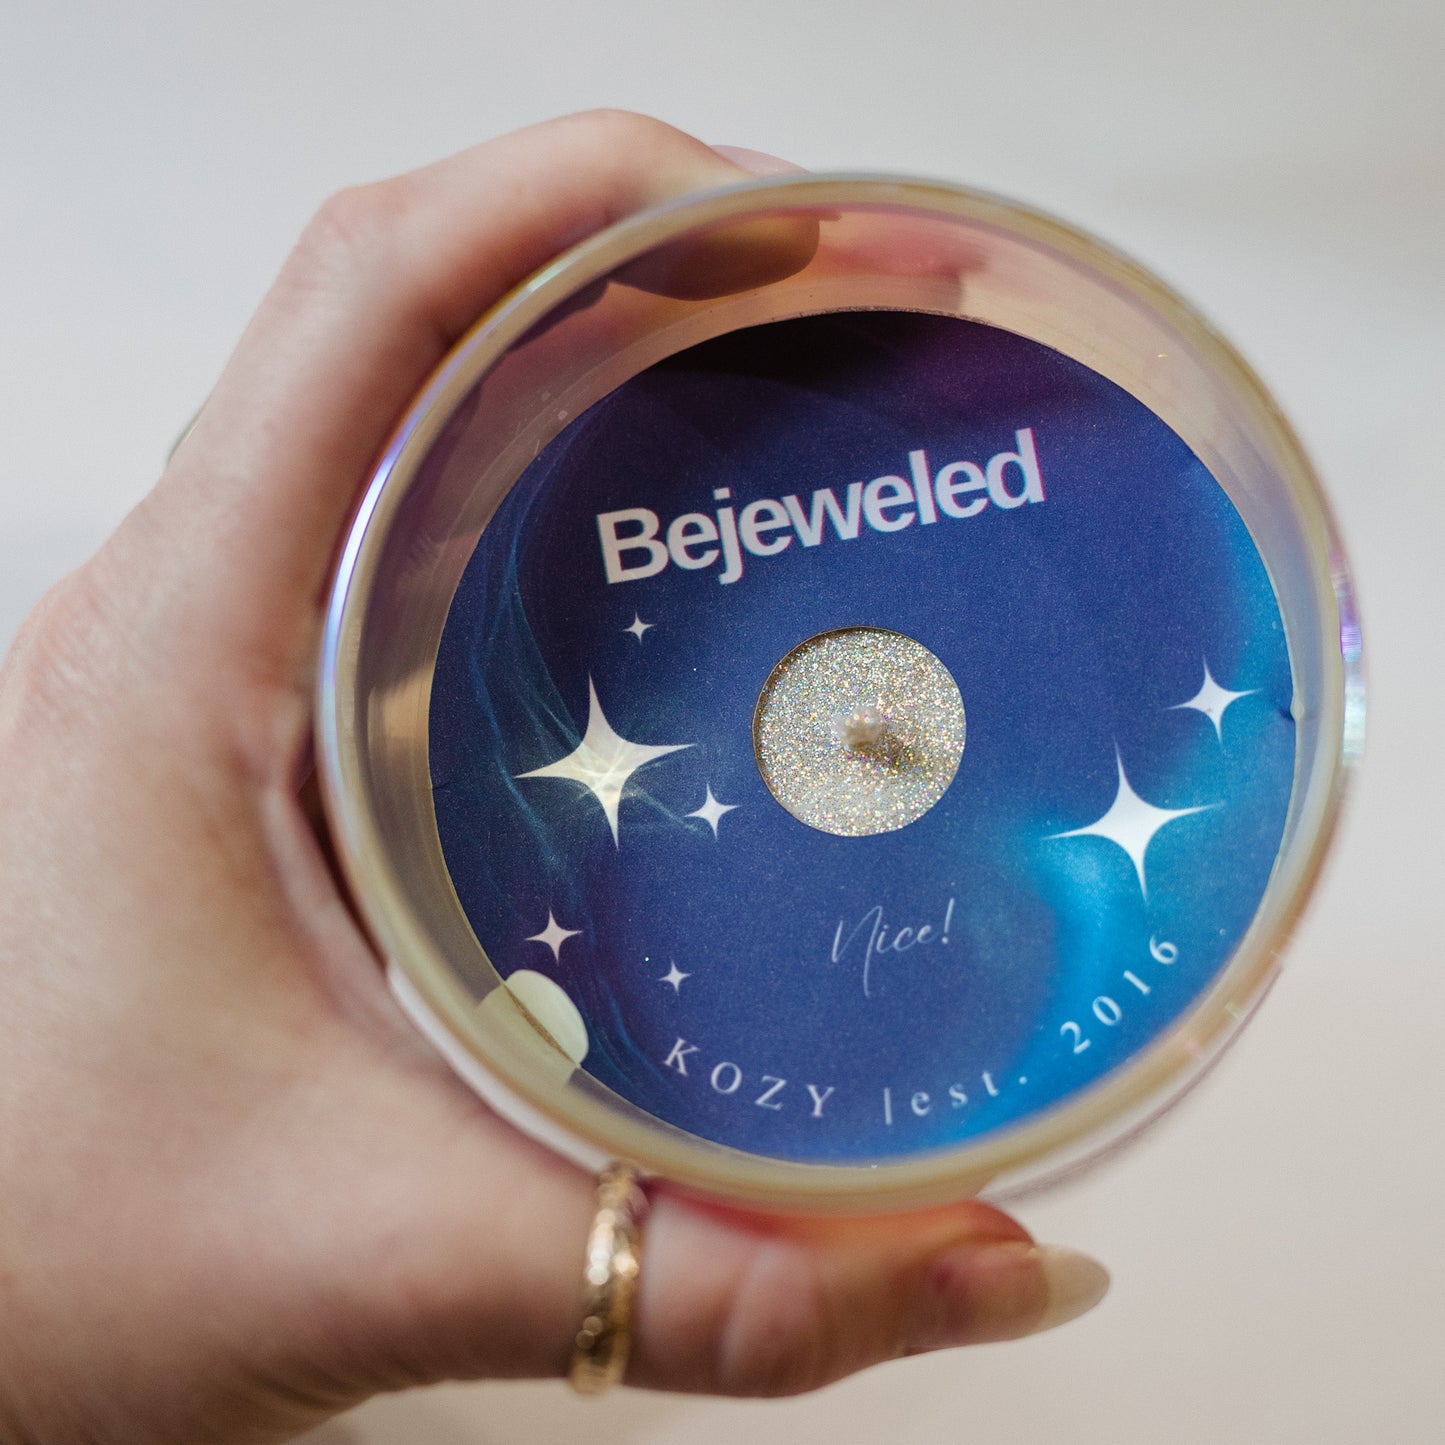 Taylor Swift Candle: Bejeweled